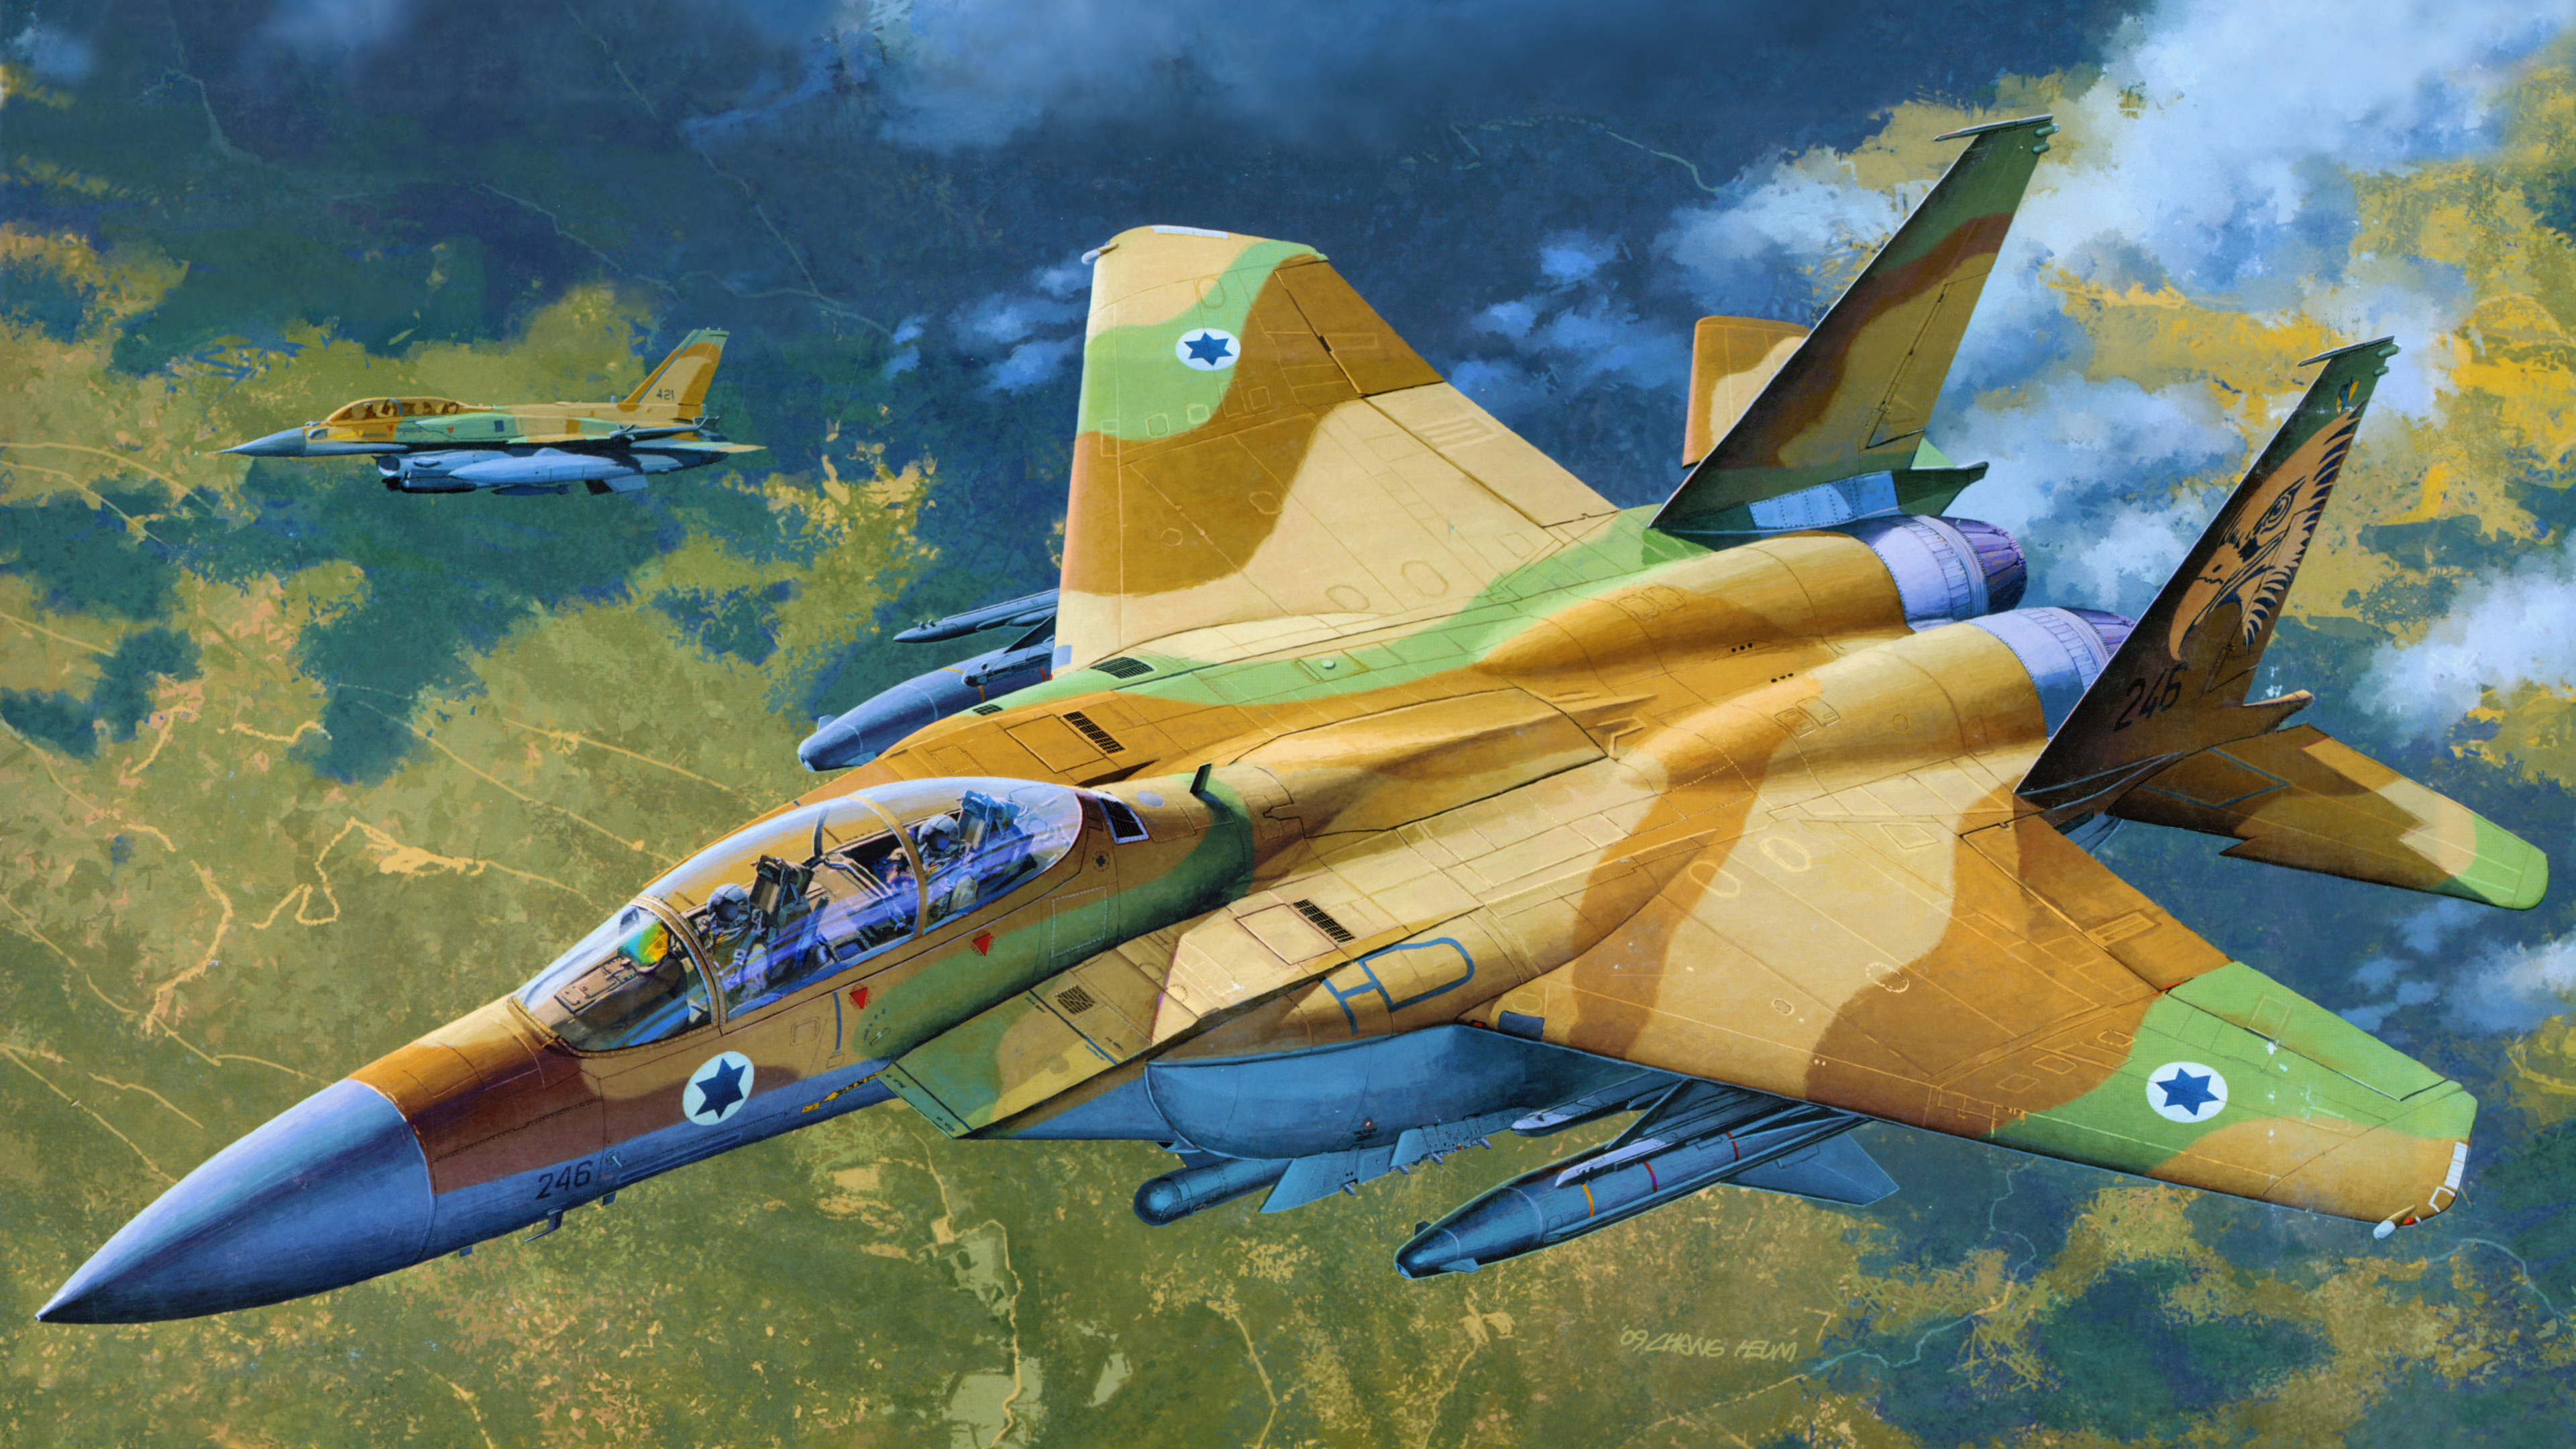 Yellow and Blue Jet Plane. Wallpaper in 3840x2160 Resolution